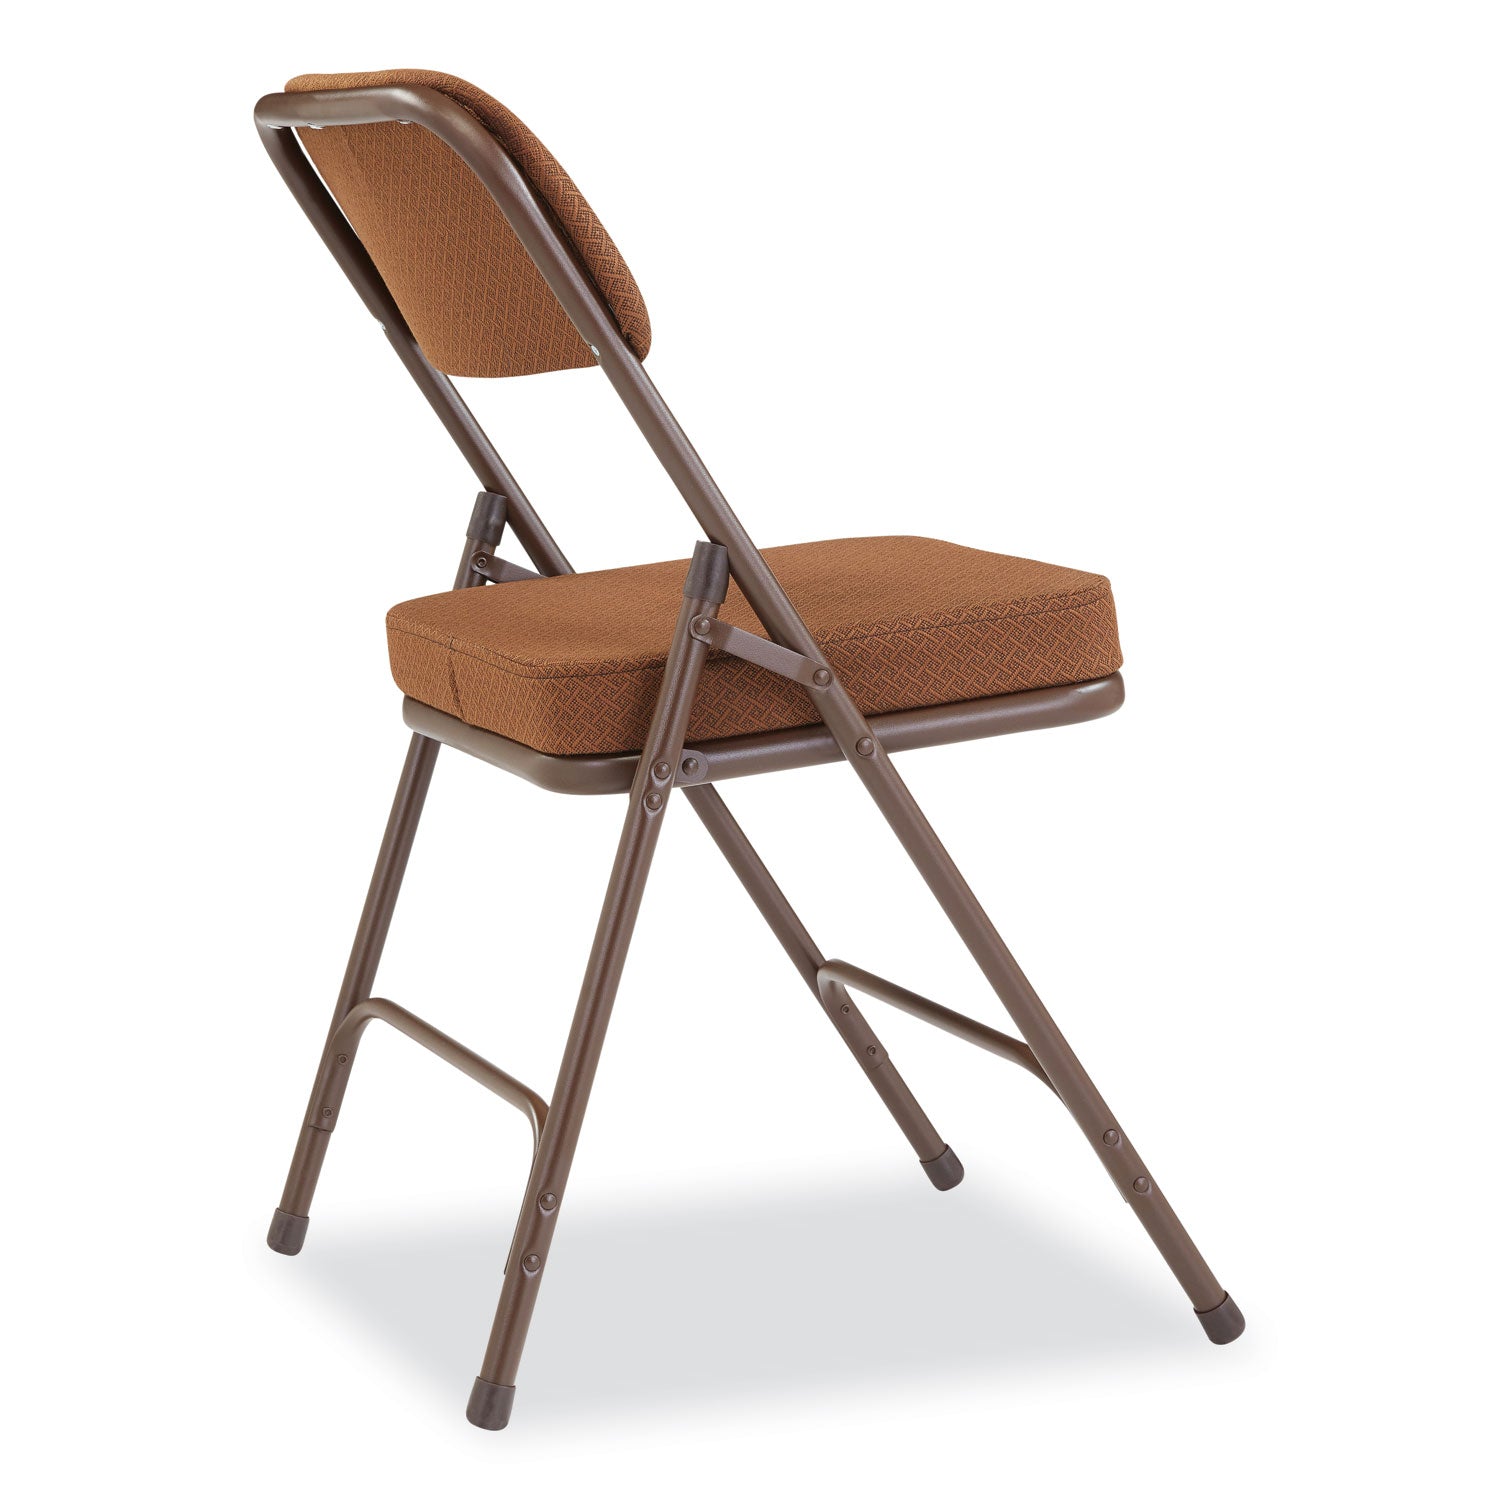 3200-series-premium-fabric-dual-hinge-folding-chair-supports-300-lb-gold-seat-back-brown-base-2-ct-ships-in-1-3-bus-days_nps3219 - 4